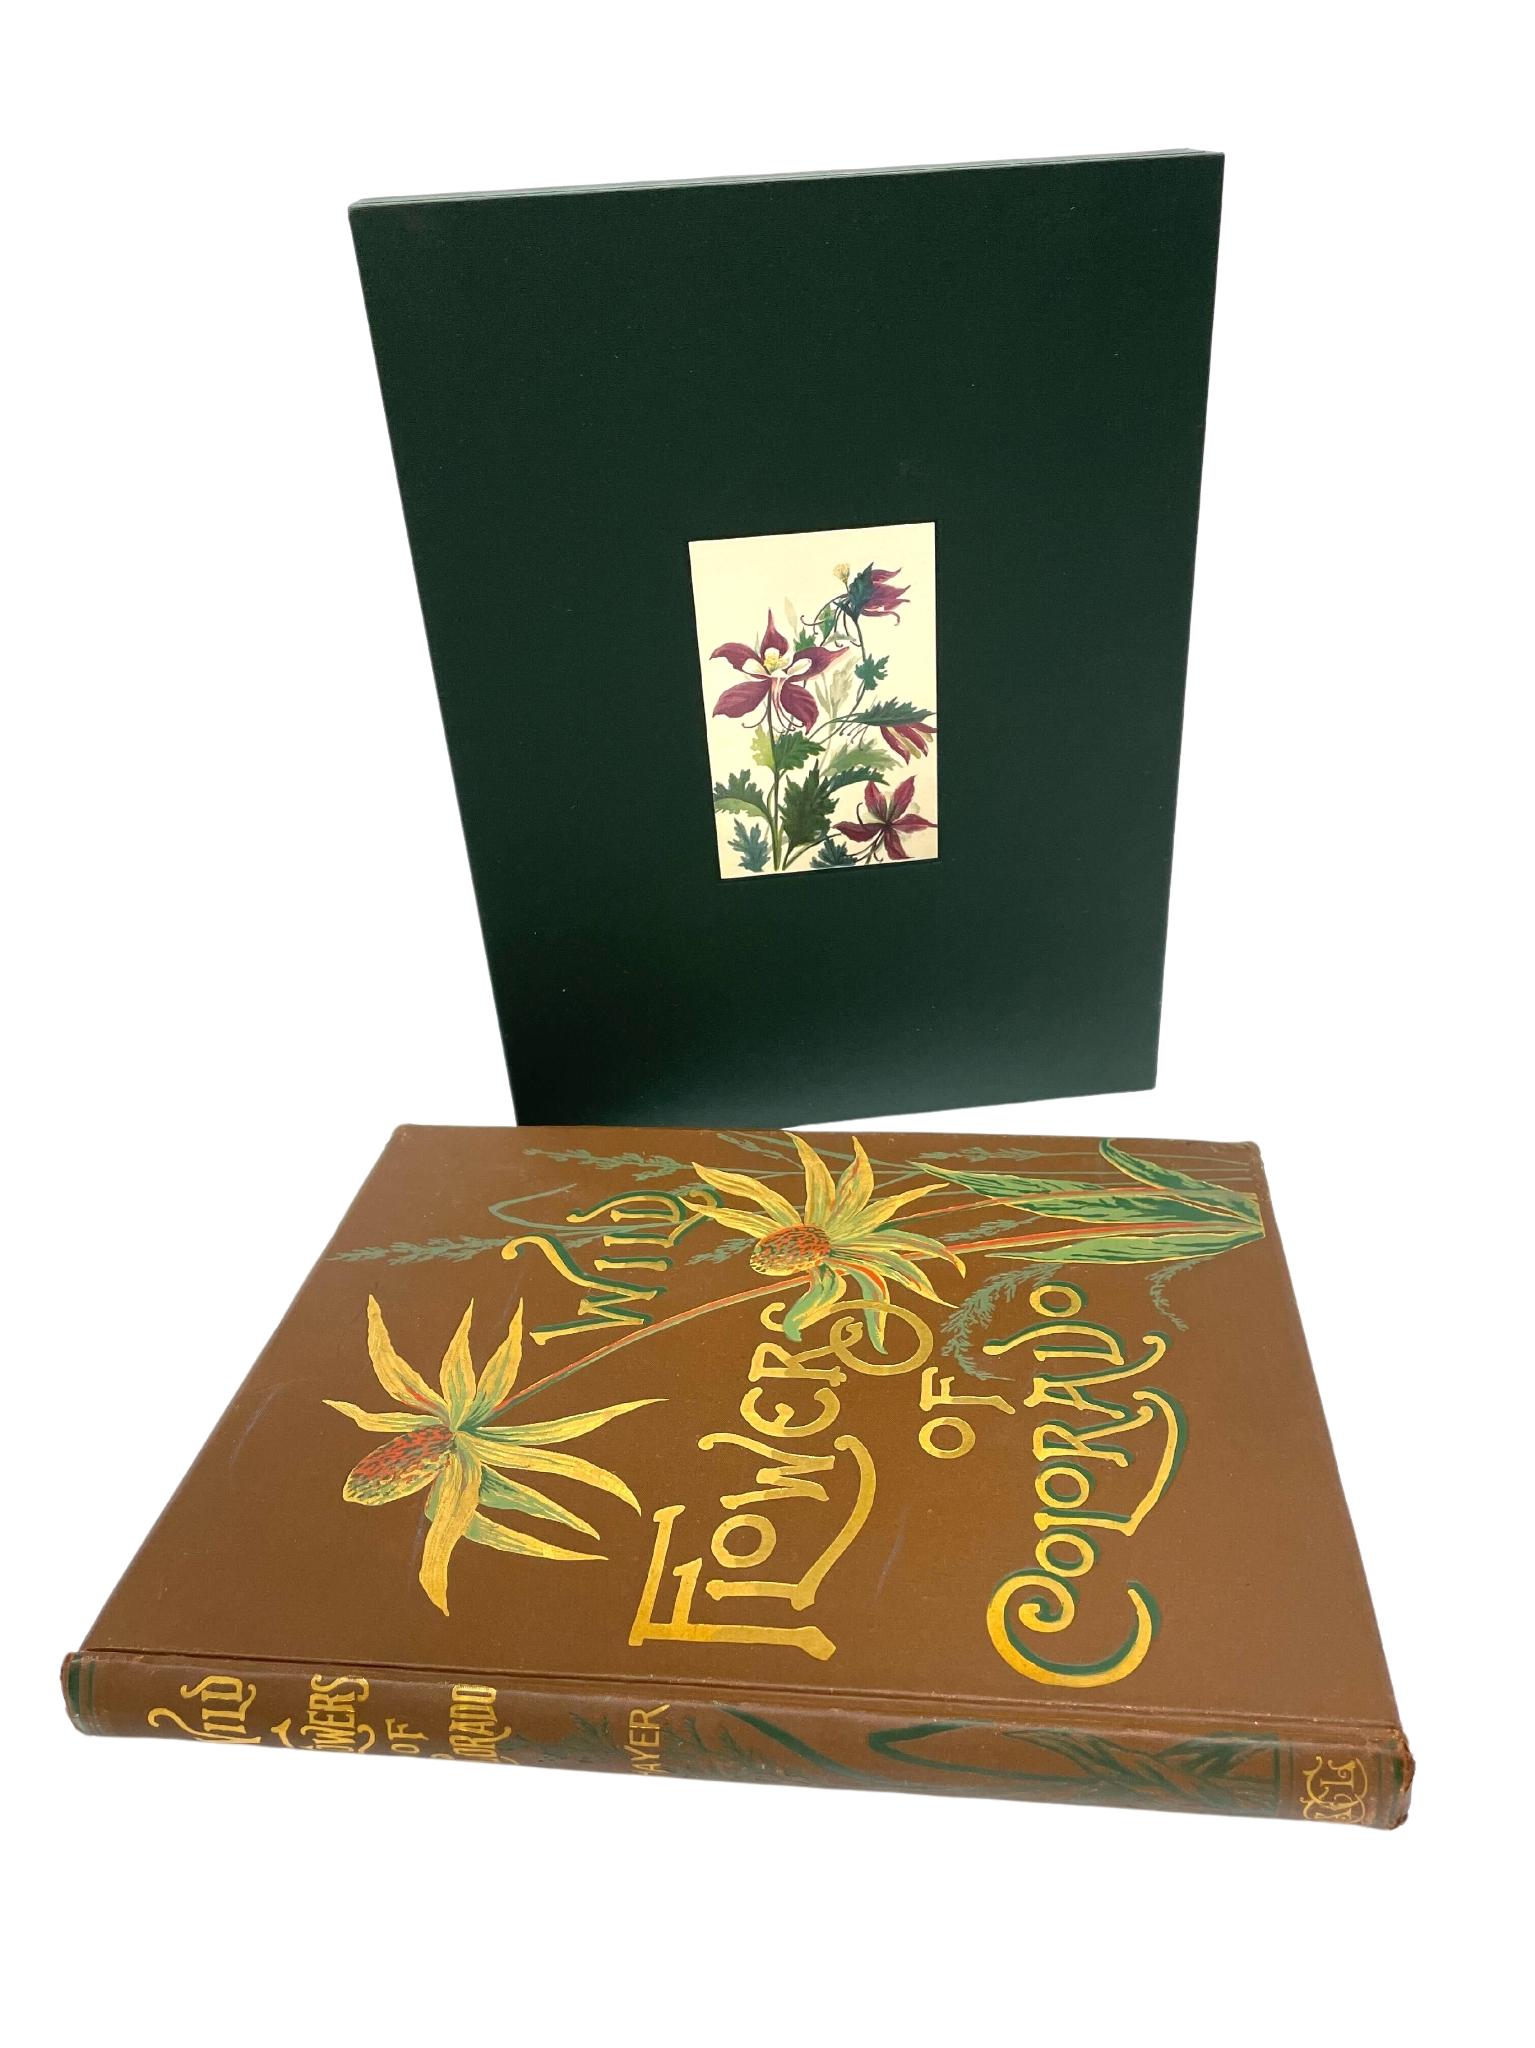 Thayer, Emma Homan. Wild Flowers of Colorado: From Original Water Color Sketches Drawn From Nature. New York: Cassell and Company, New York, 1885. First edition. Illustrated with 24 lithographic plates. In the original publisher’s brown cloth